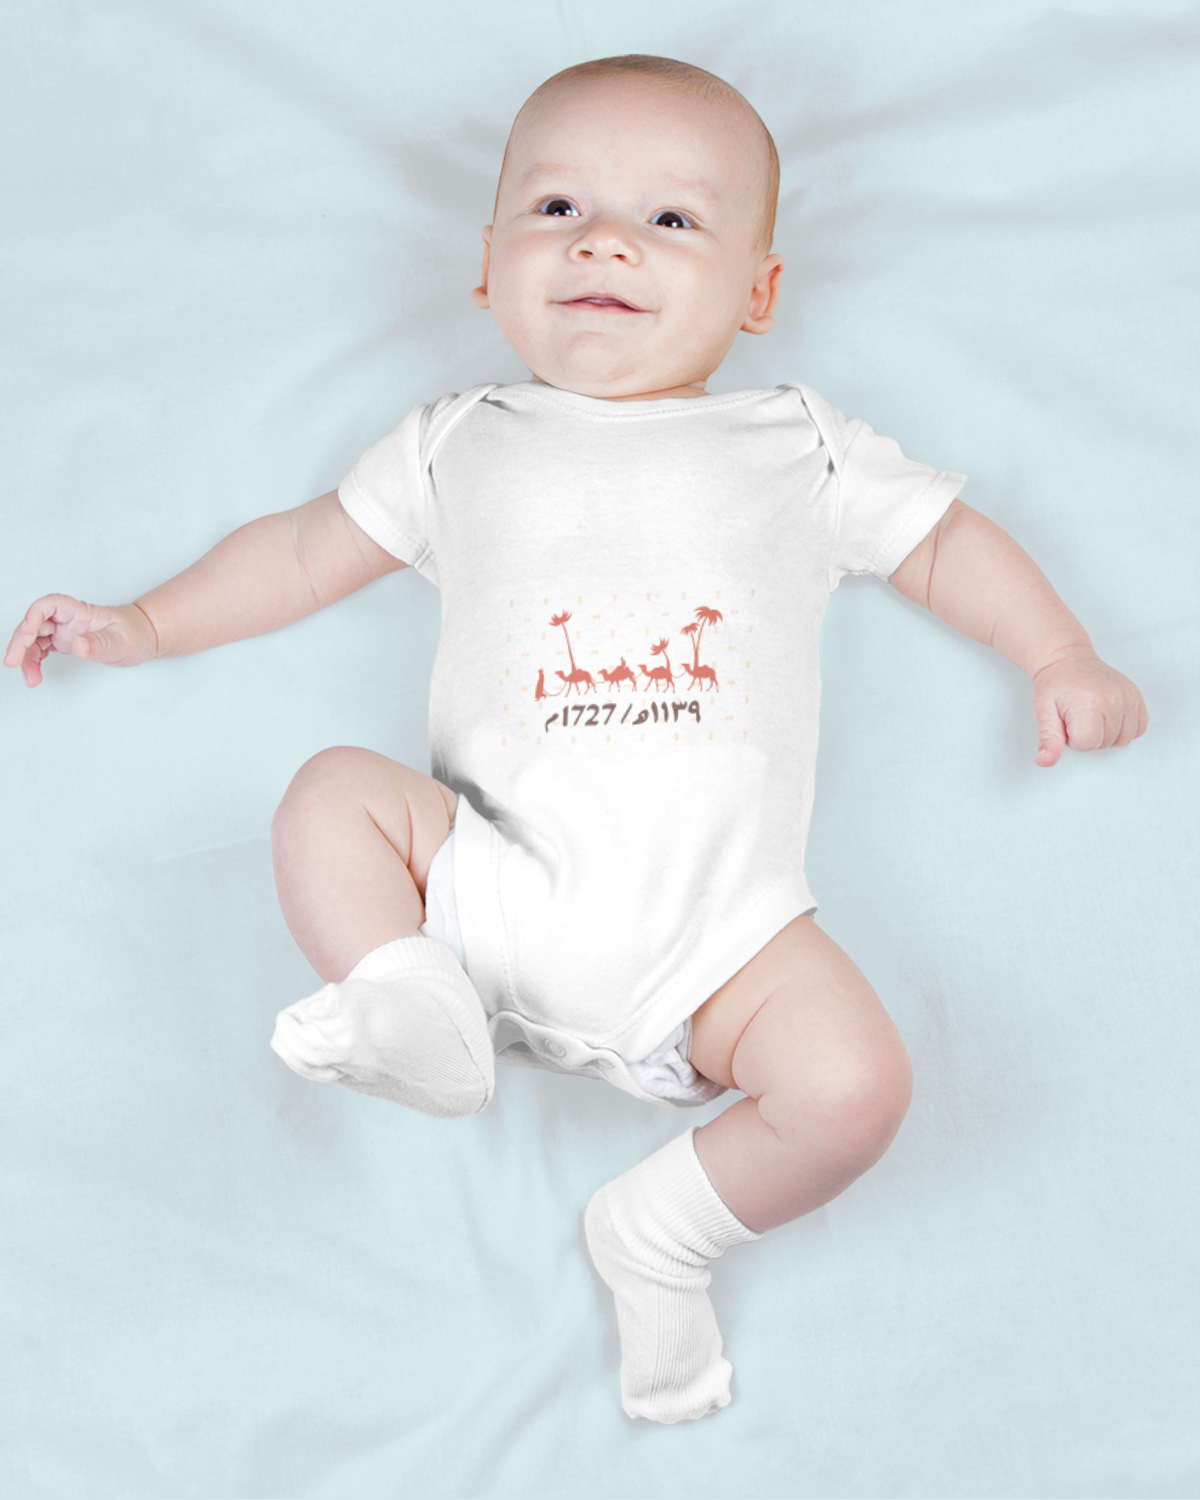 Foundation Day Baby Romper (1139 AH/1727 AD)